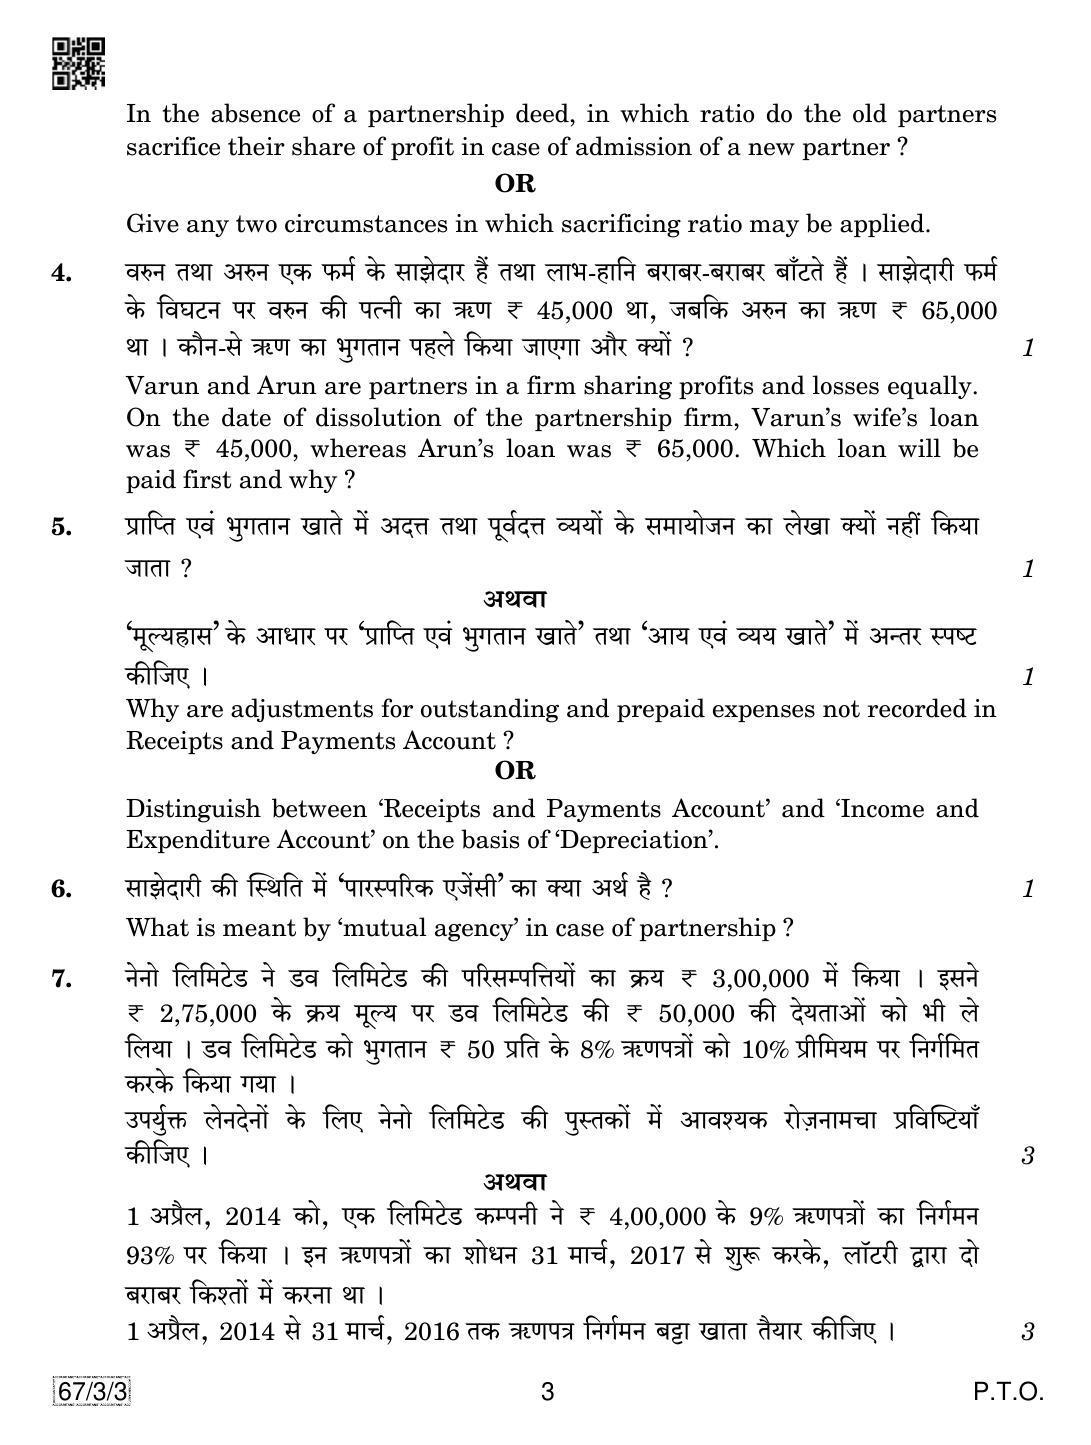 CBSE Class 12 67-3-3 Accountancy 2019 Question Paper - Page 3